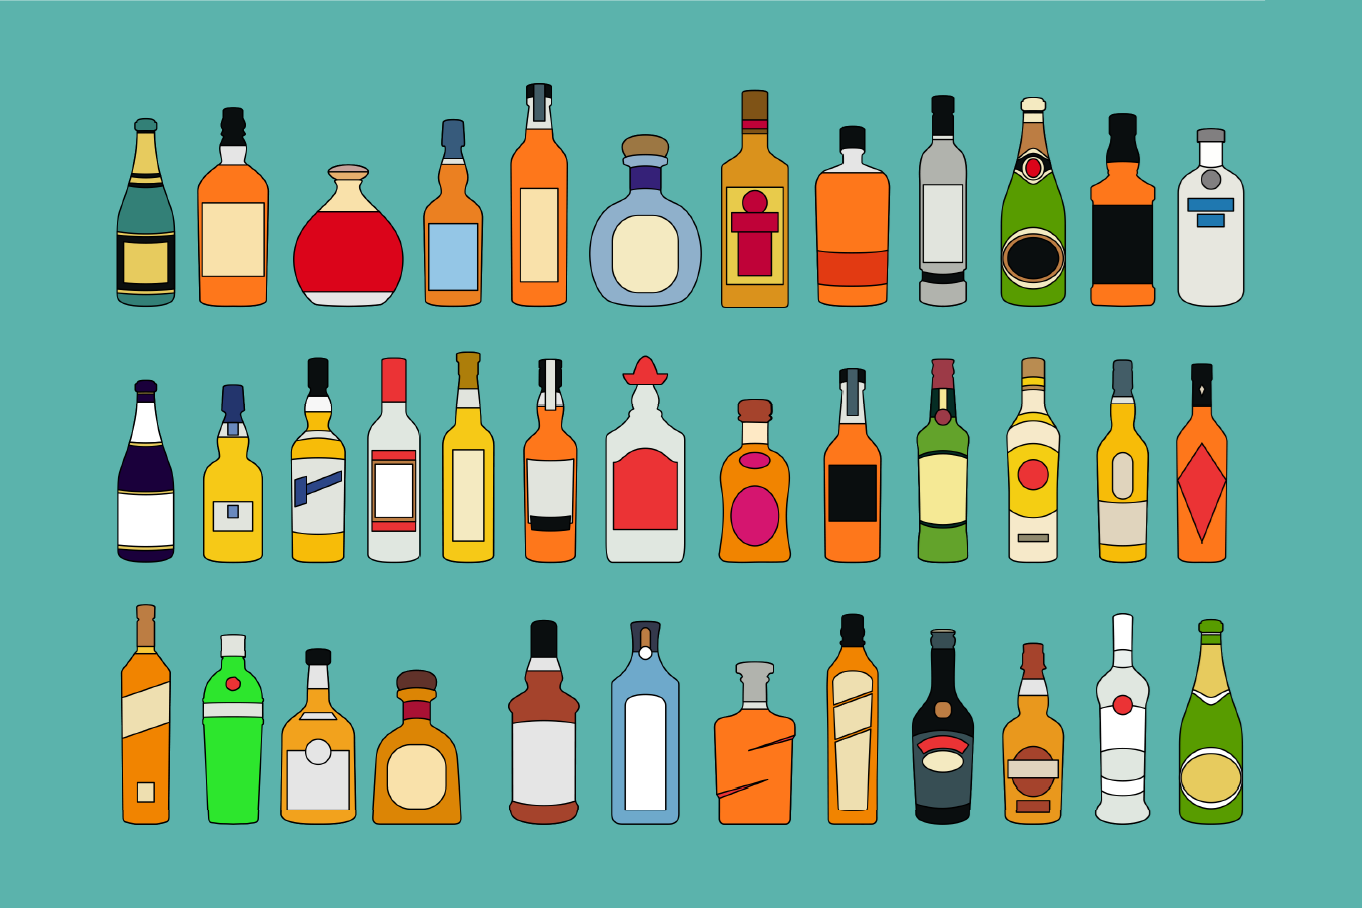 Image of bottles of alcohol